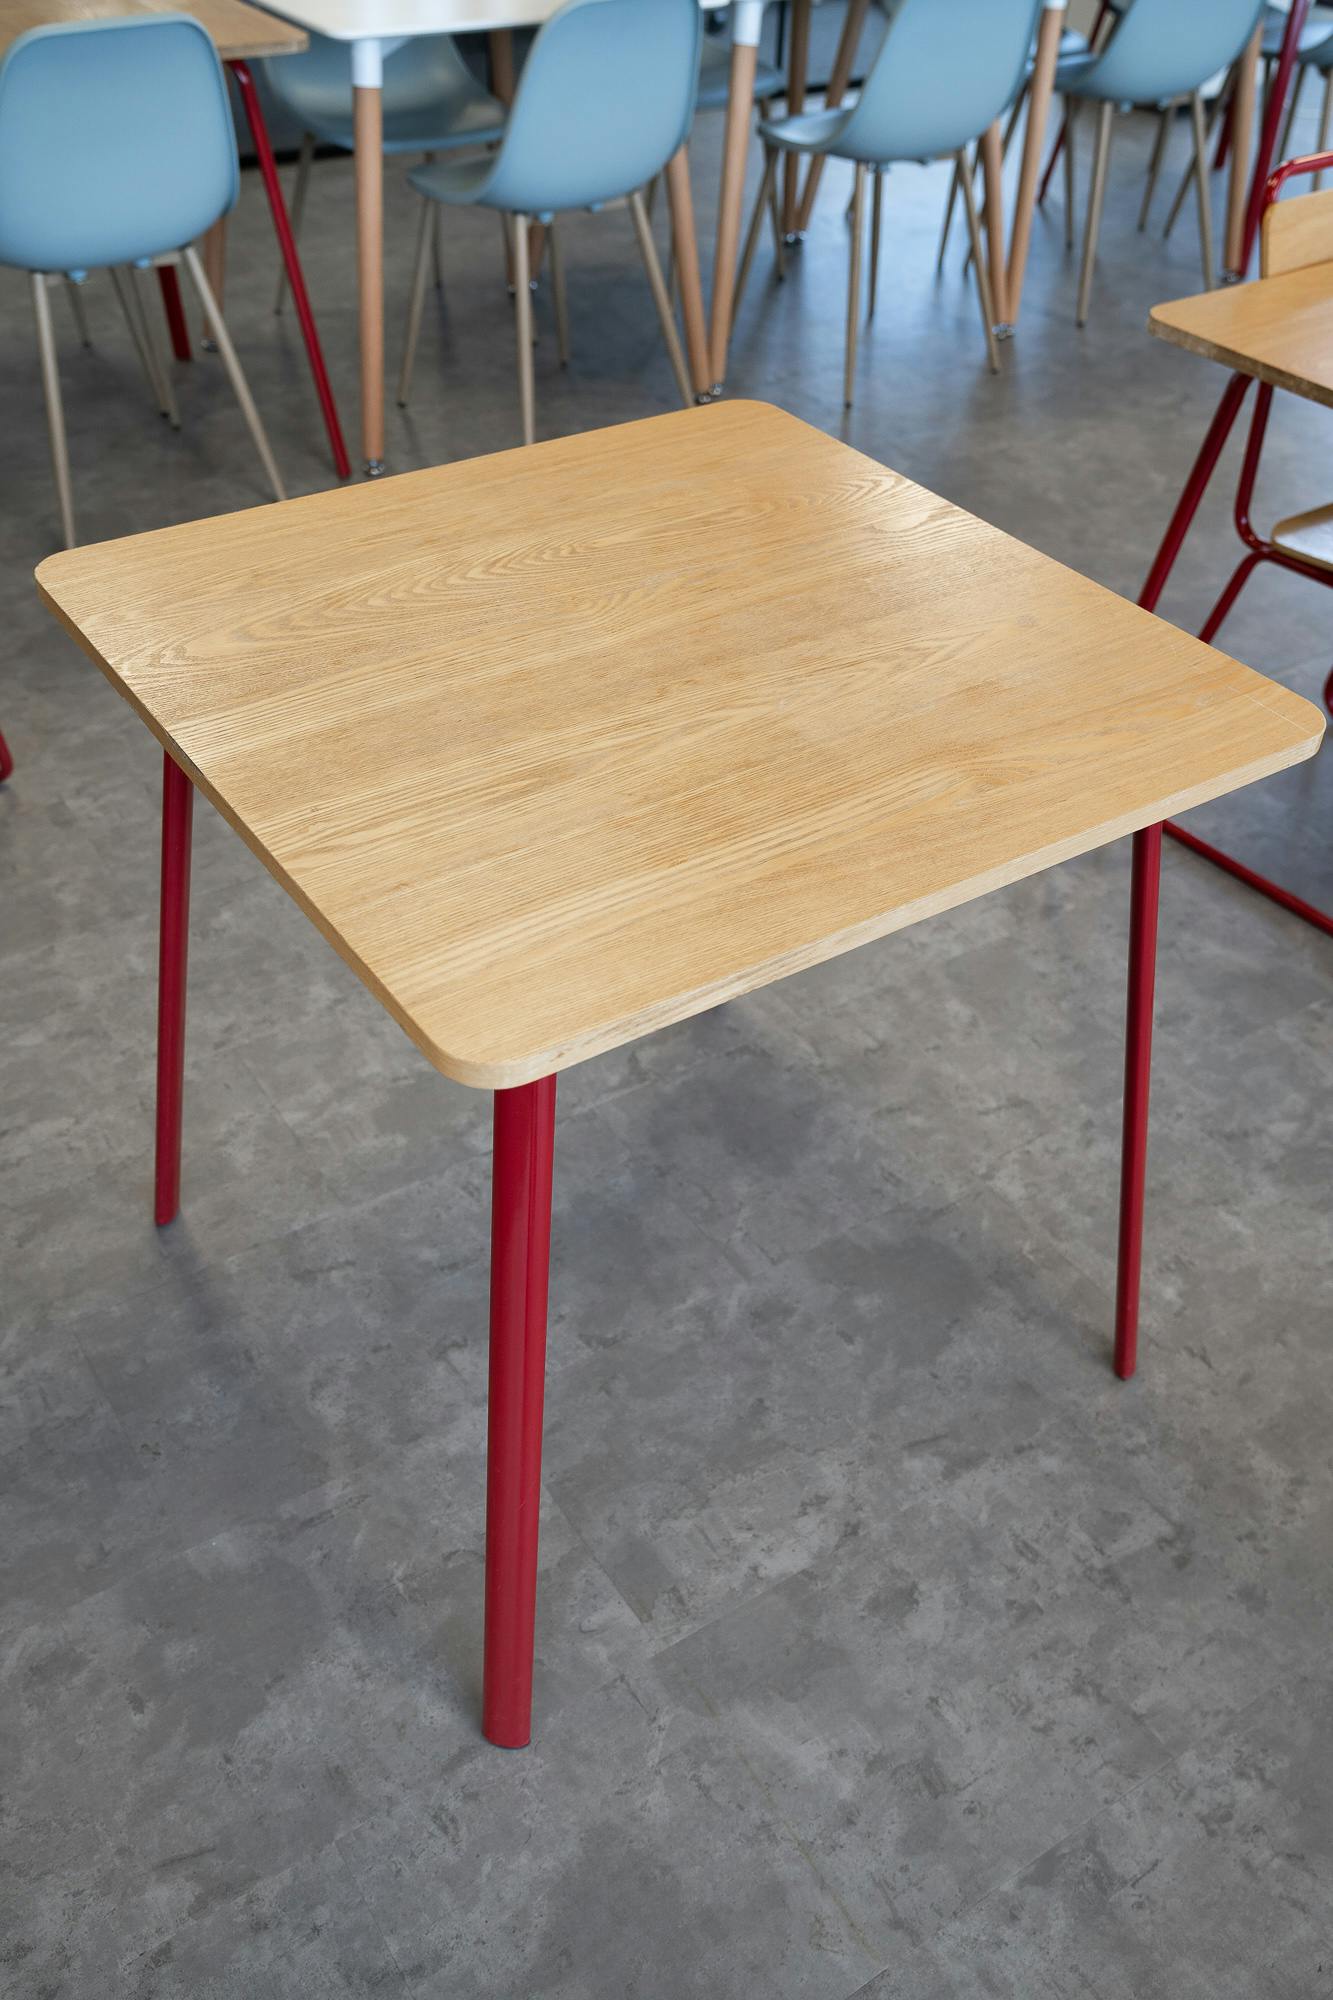 Cafeteria table - Second hand quality "Tables" - Relieve Furniture - 1